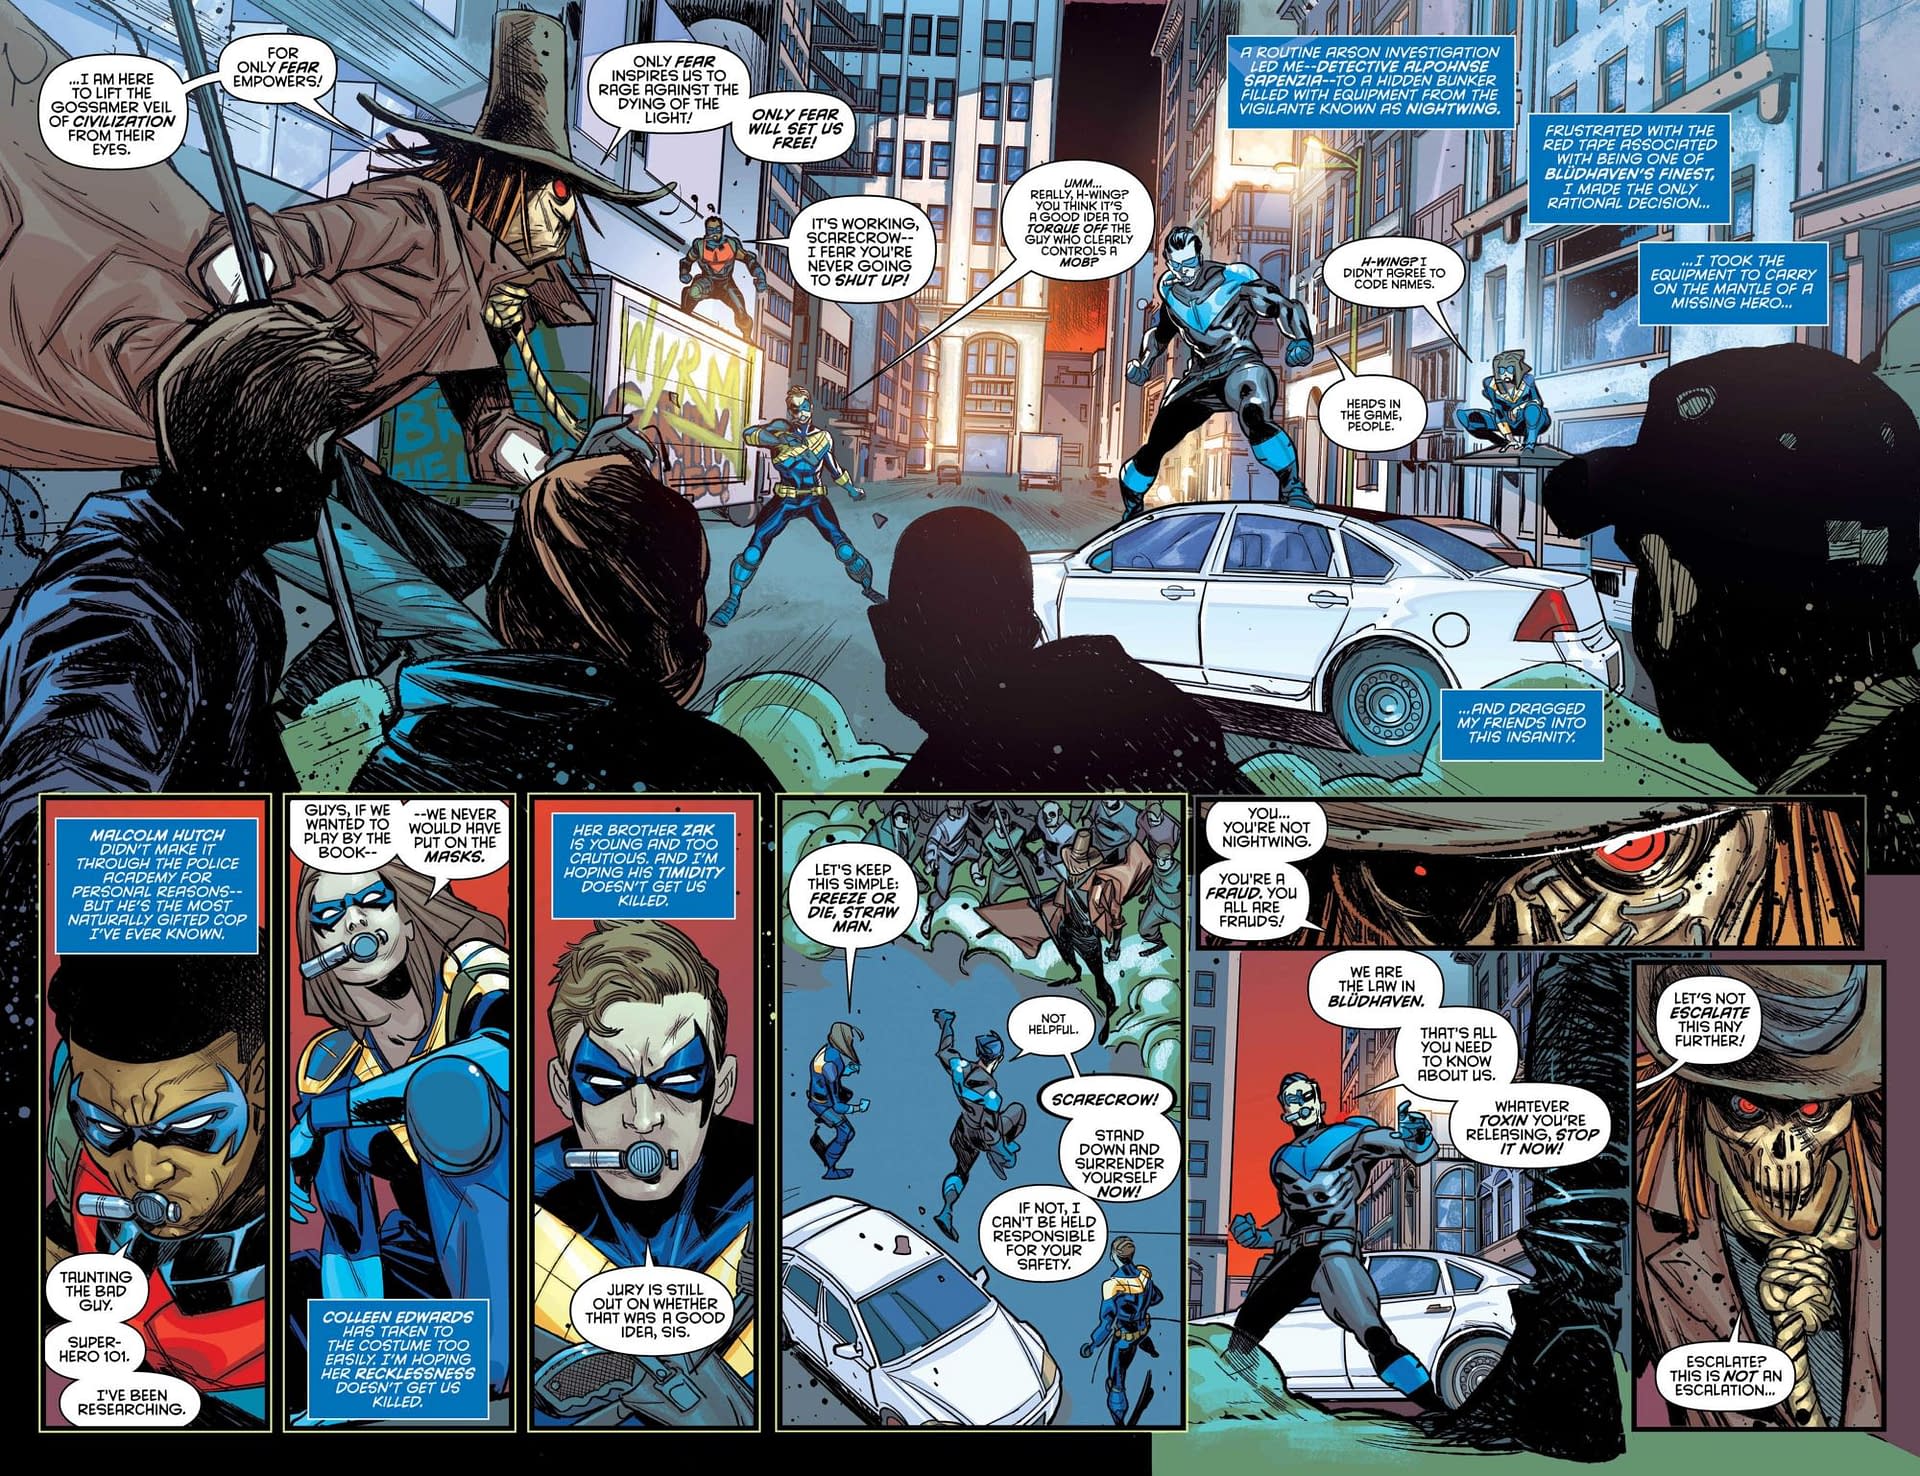 Nightwings vs. the People in Wednesday's Nightwing #56